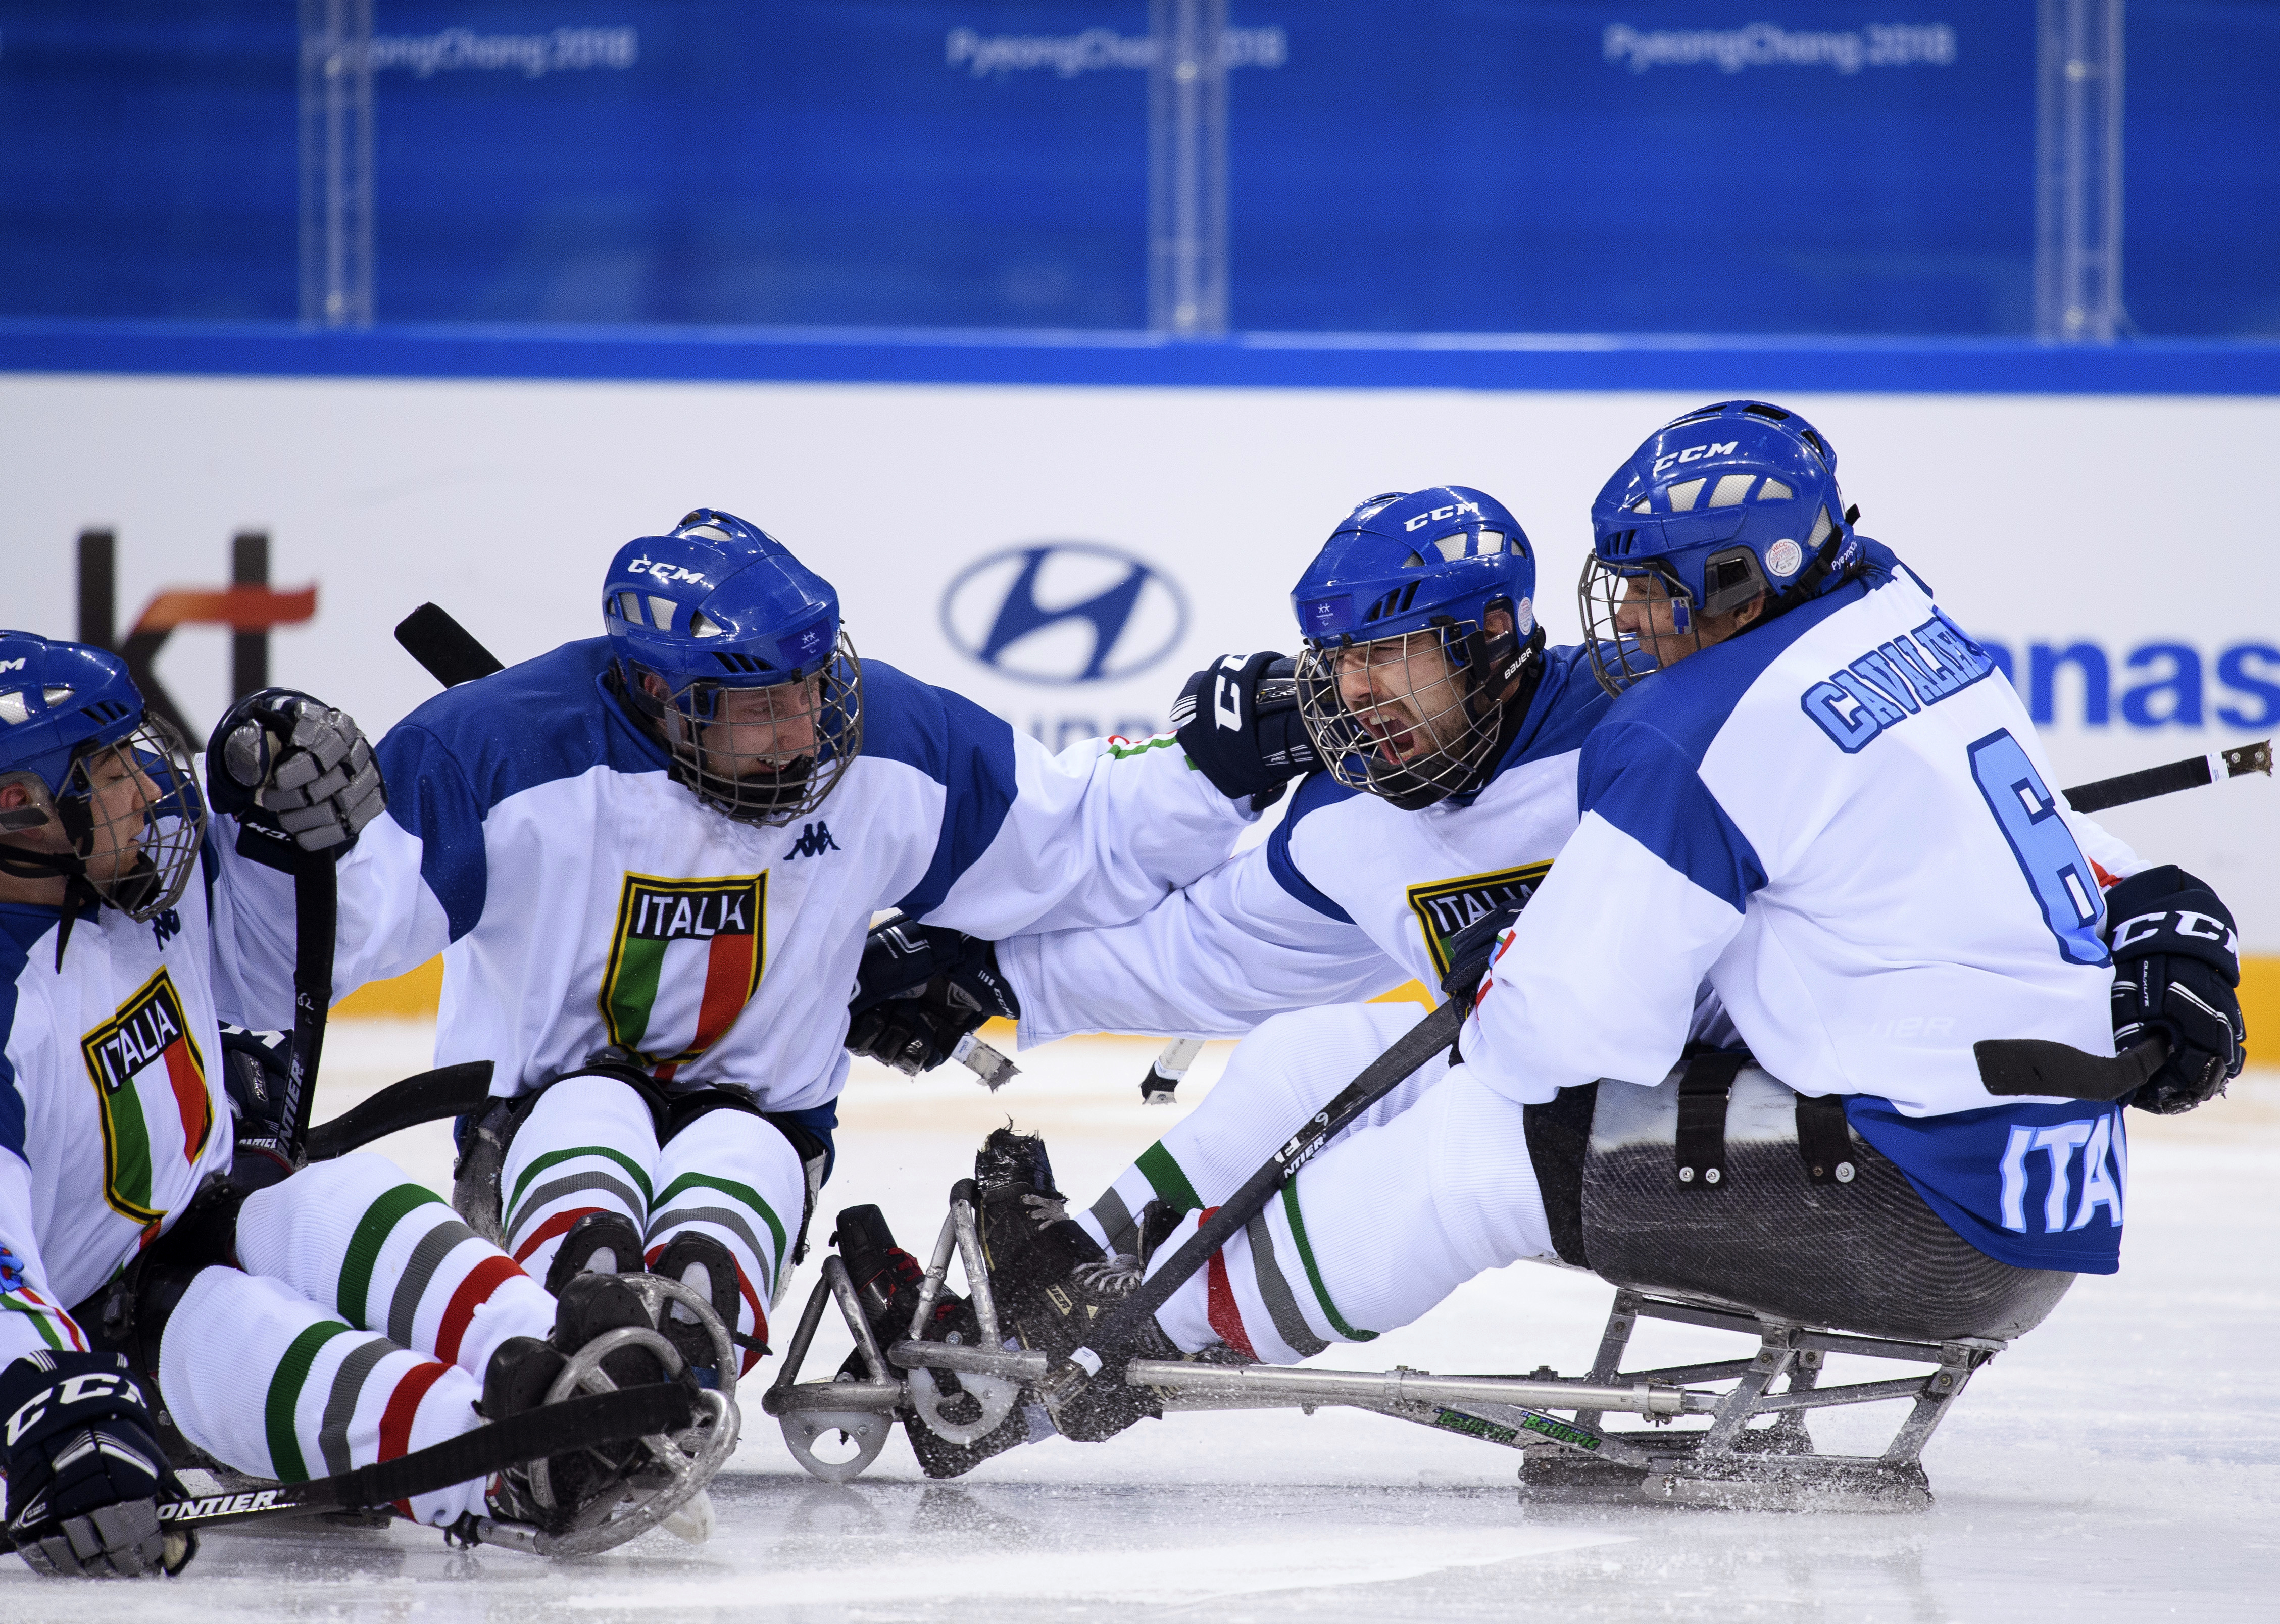 Italy's team players celebrate after scoring during the Ice Hockey Group A Preliminary Game between Norway and Italy at the Gangneung Hockey Centre at the Paralympic Winter Games in Pyeongchang, South Korea, Saturday, March 10, 2018. (Joel Marklund/OIS/IOC via AP)